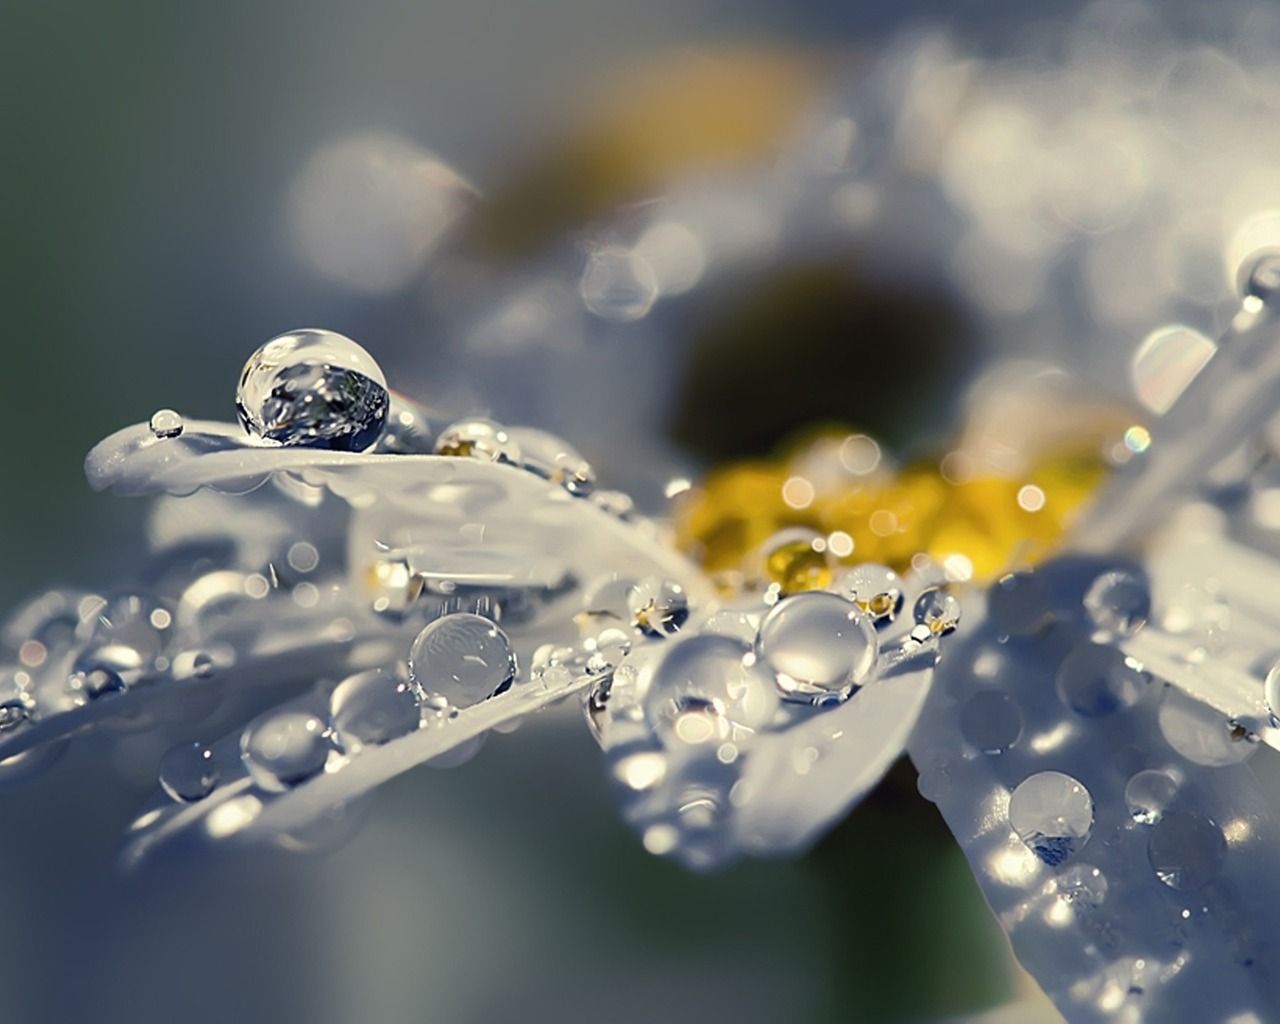 Flower with Raindrops 1280 x 1024 Wallpaper